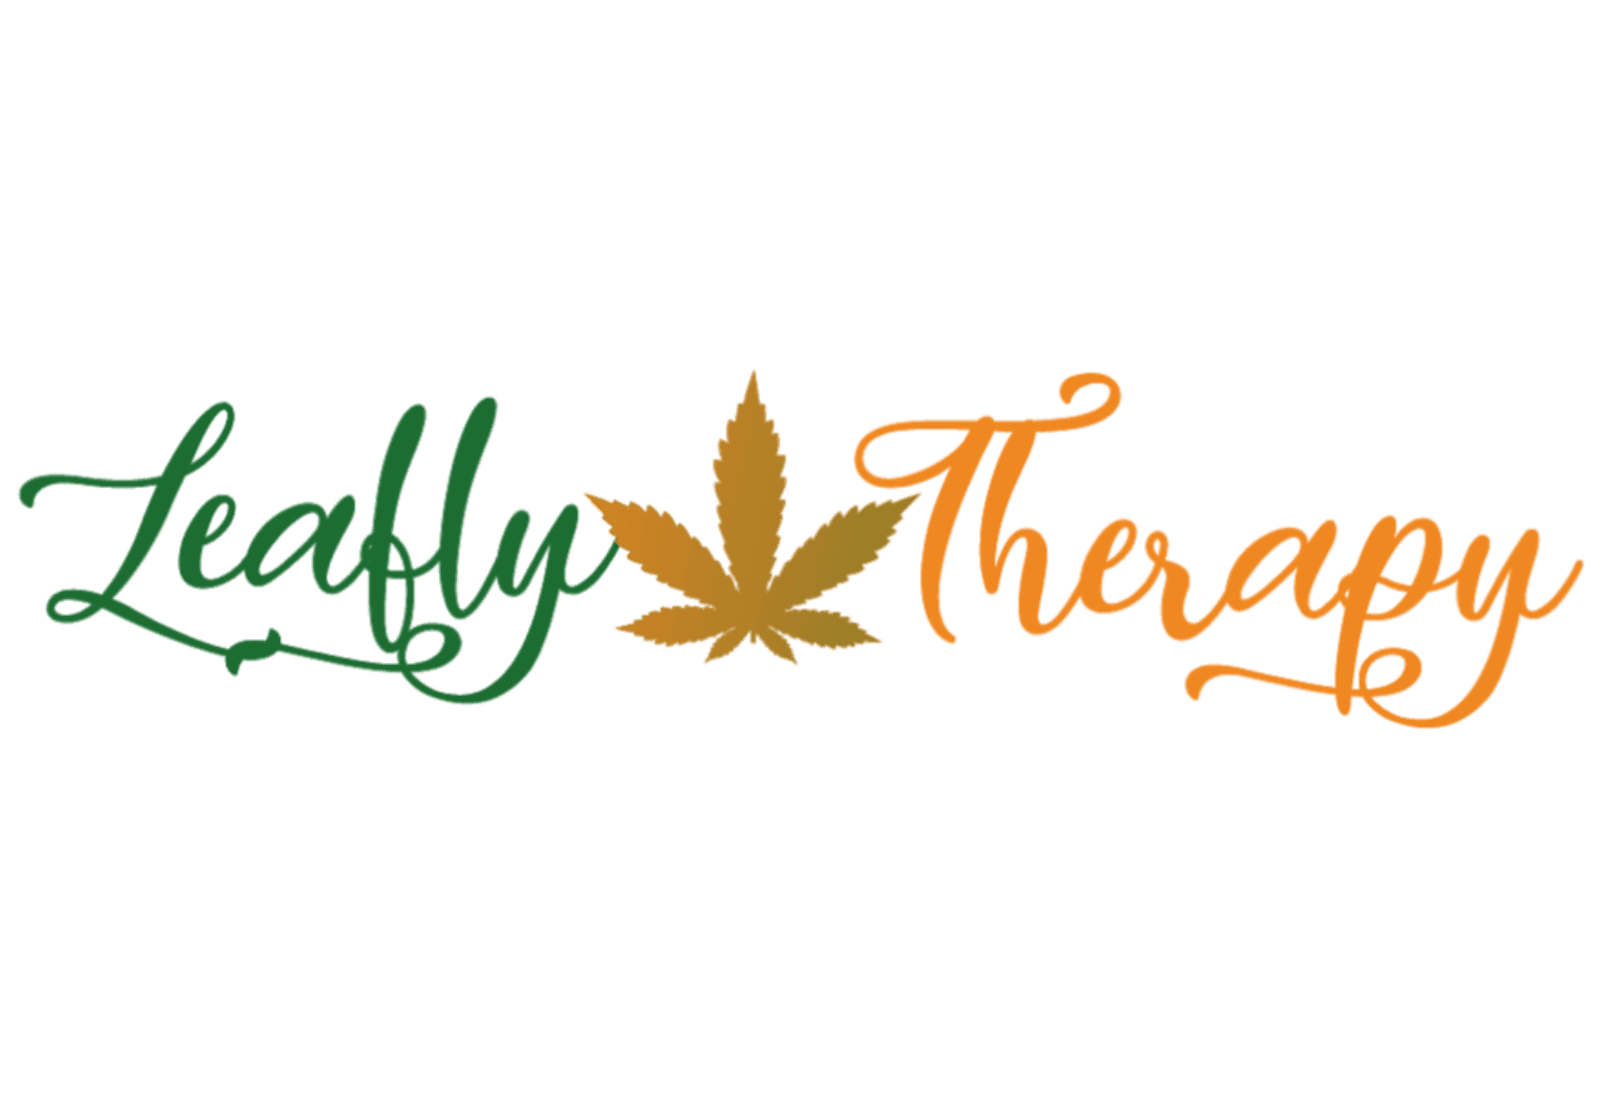 Leafly Therapy